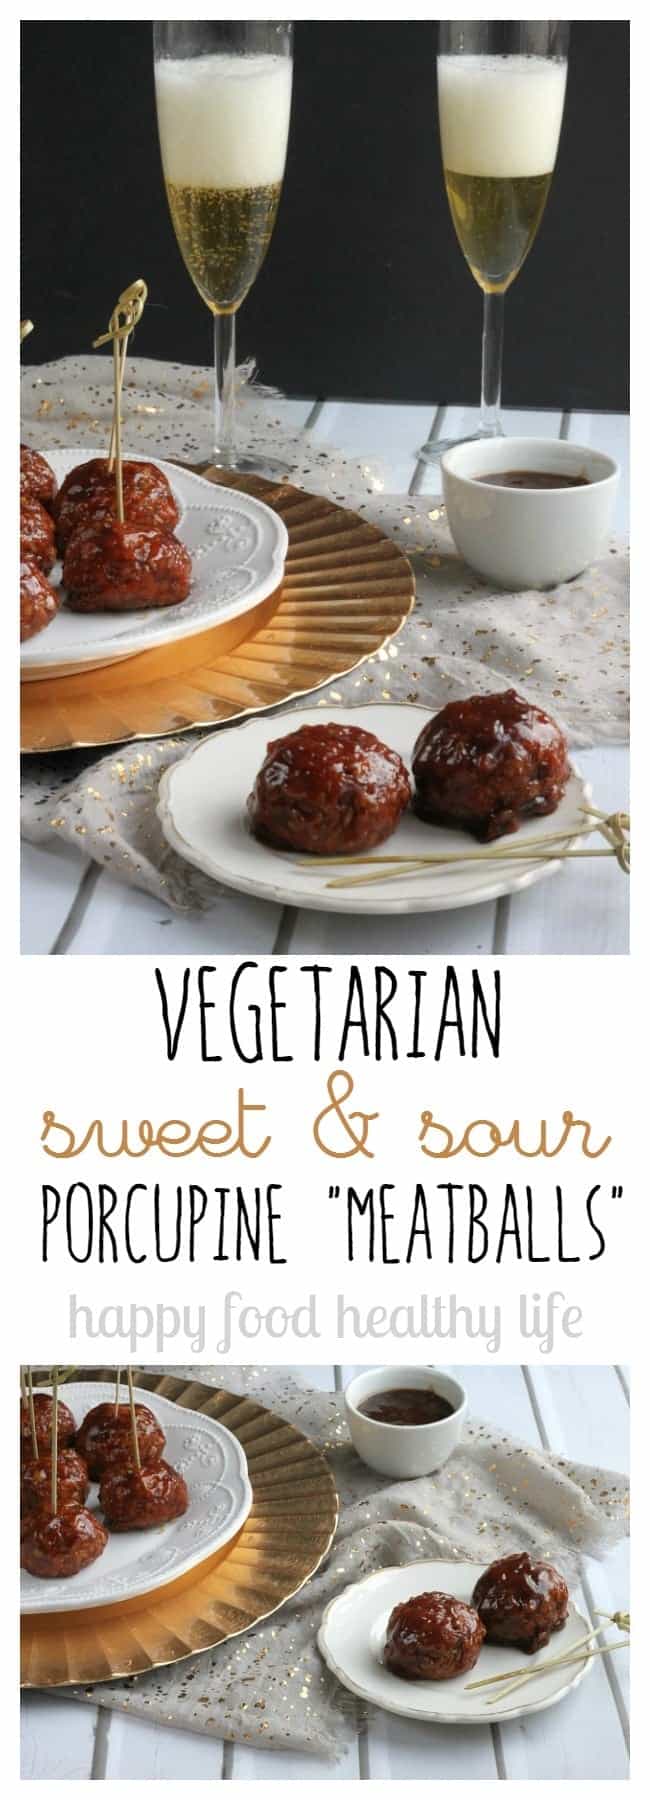 Vegetarian Sweet & Sour Porcupine "Meatballs" - this is hands-down the best meatless appetizer I've ever brought to a party - and they were gone in a flash! | www.happyfoodhealthylife.com